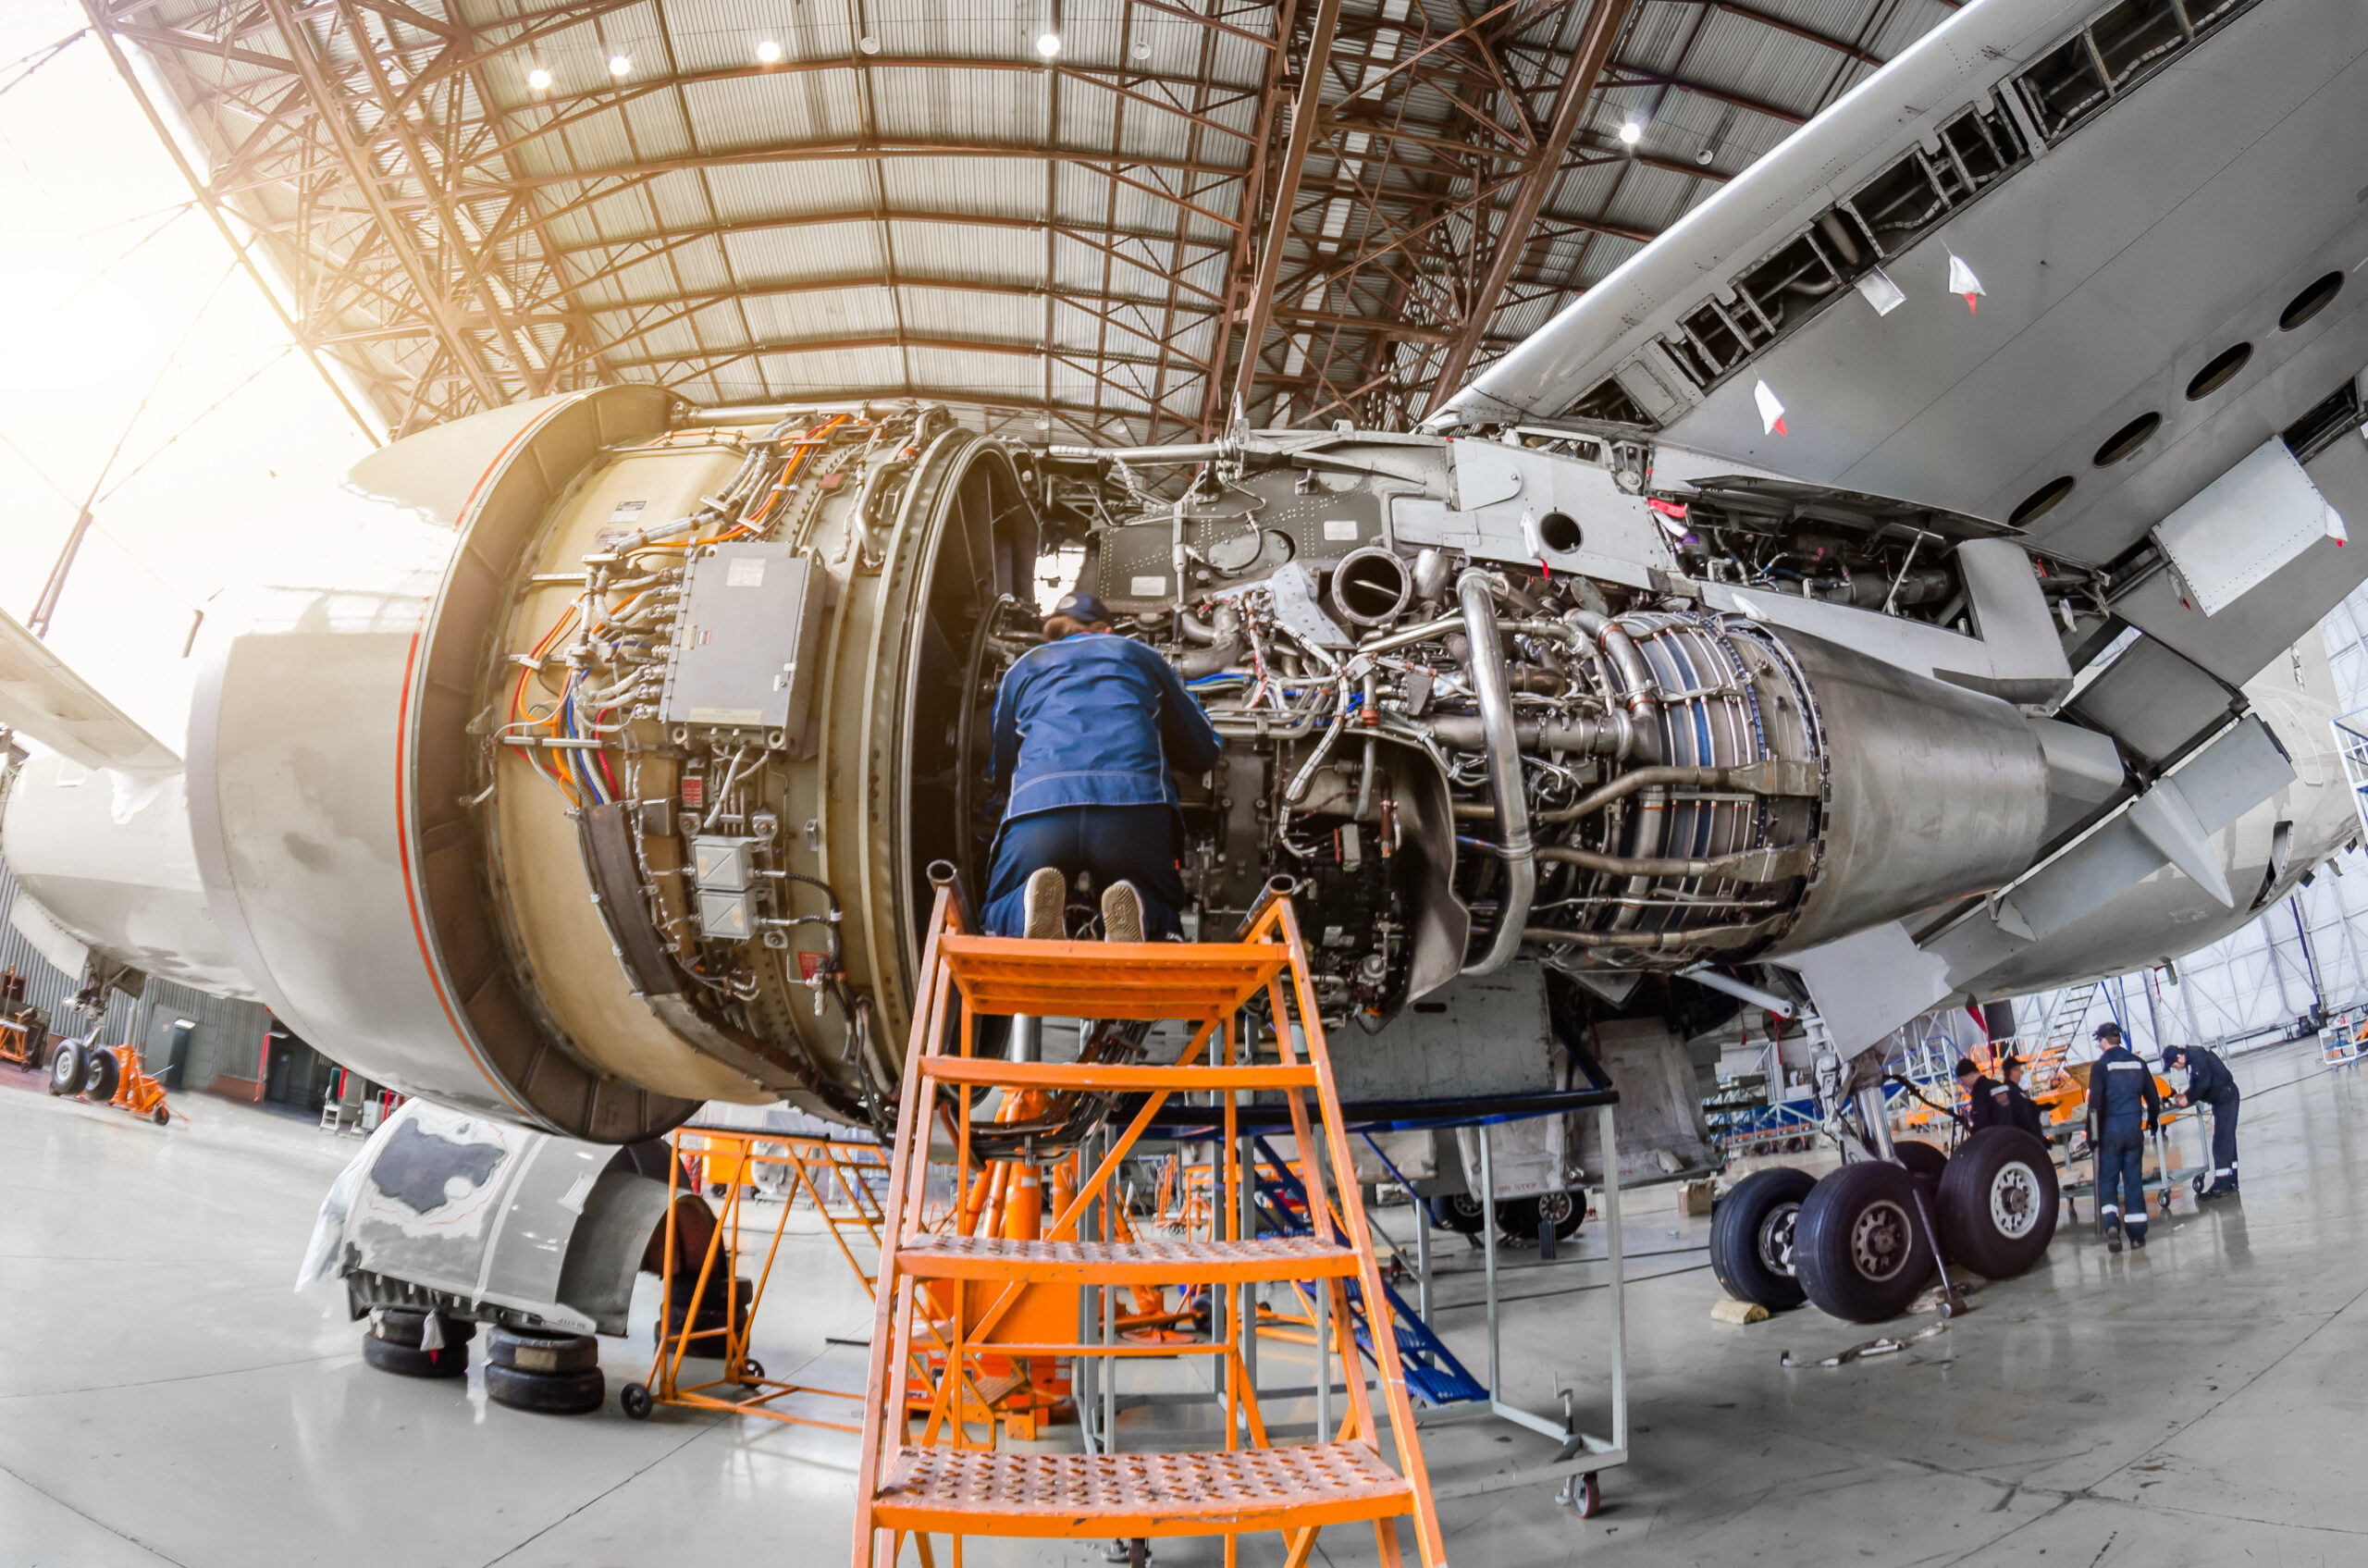 Specialist mechanic repairs the maintenance of a large engine of a passenger aircraft in a hangar.